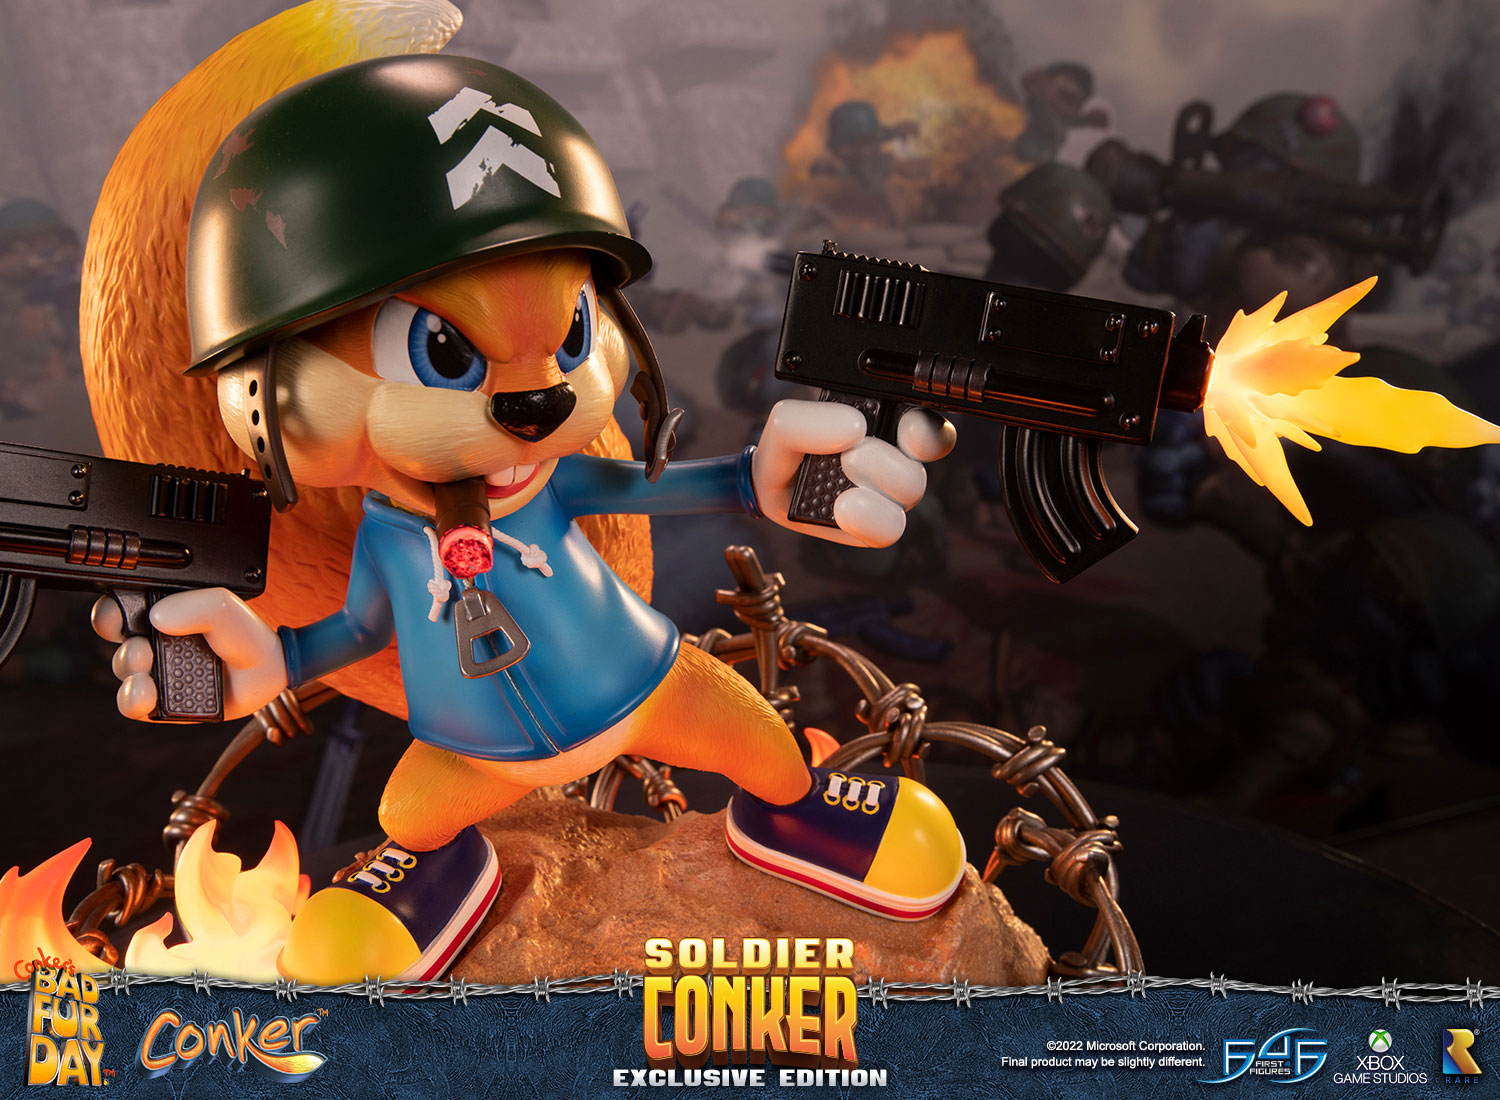 Soldier Conker (Exclusive Edition)